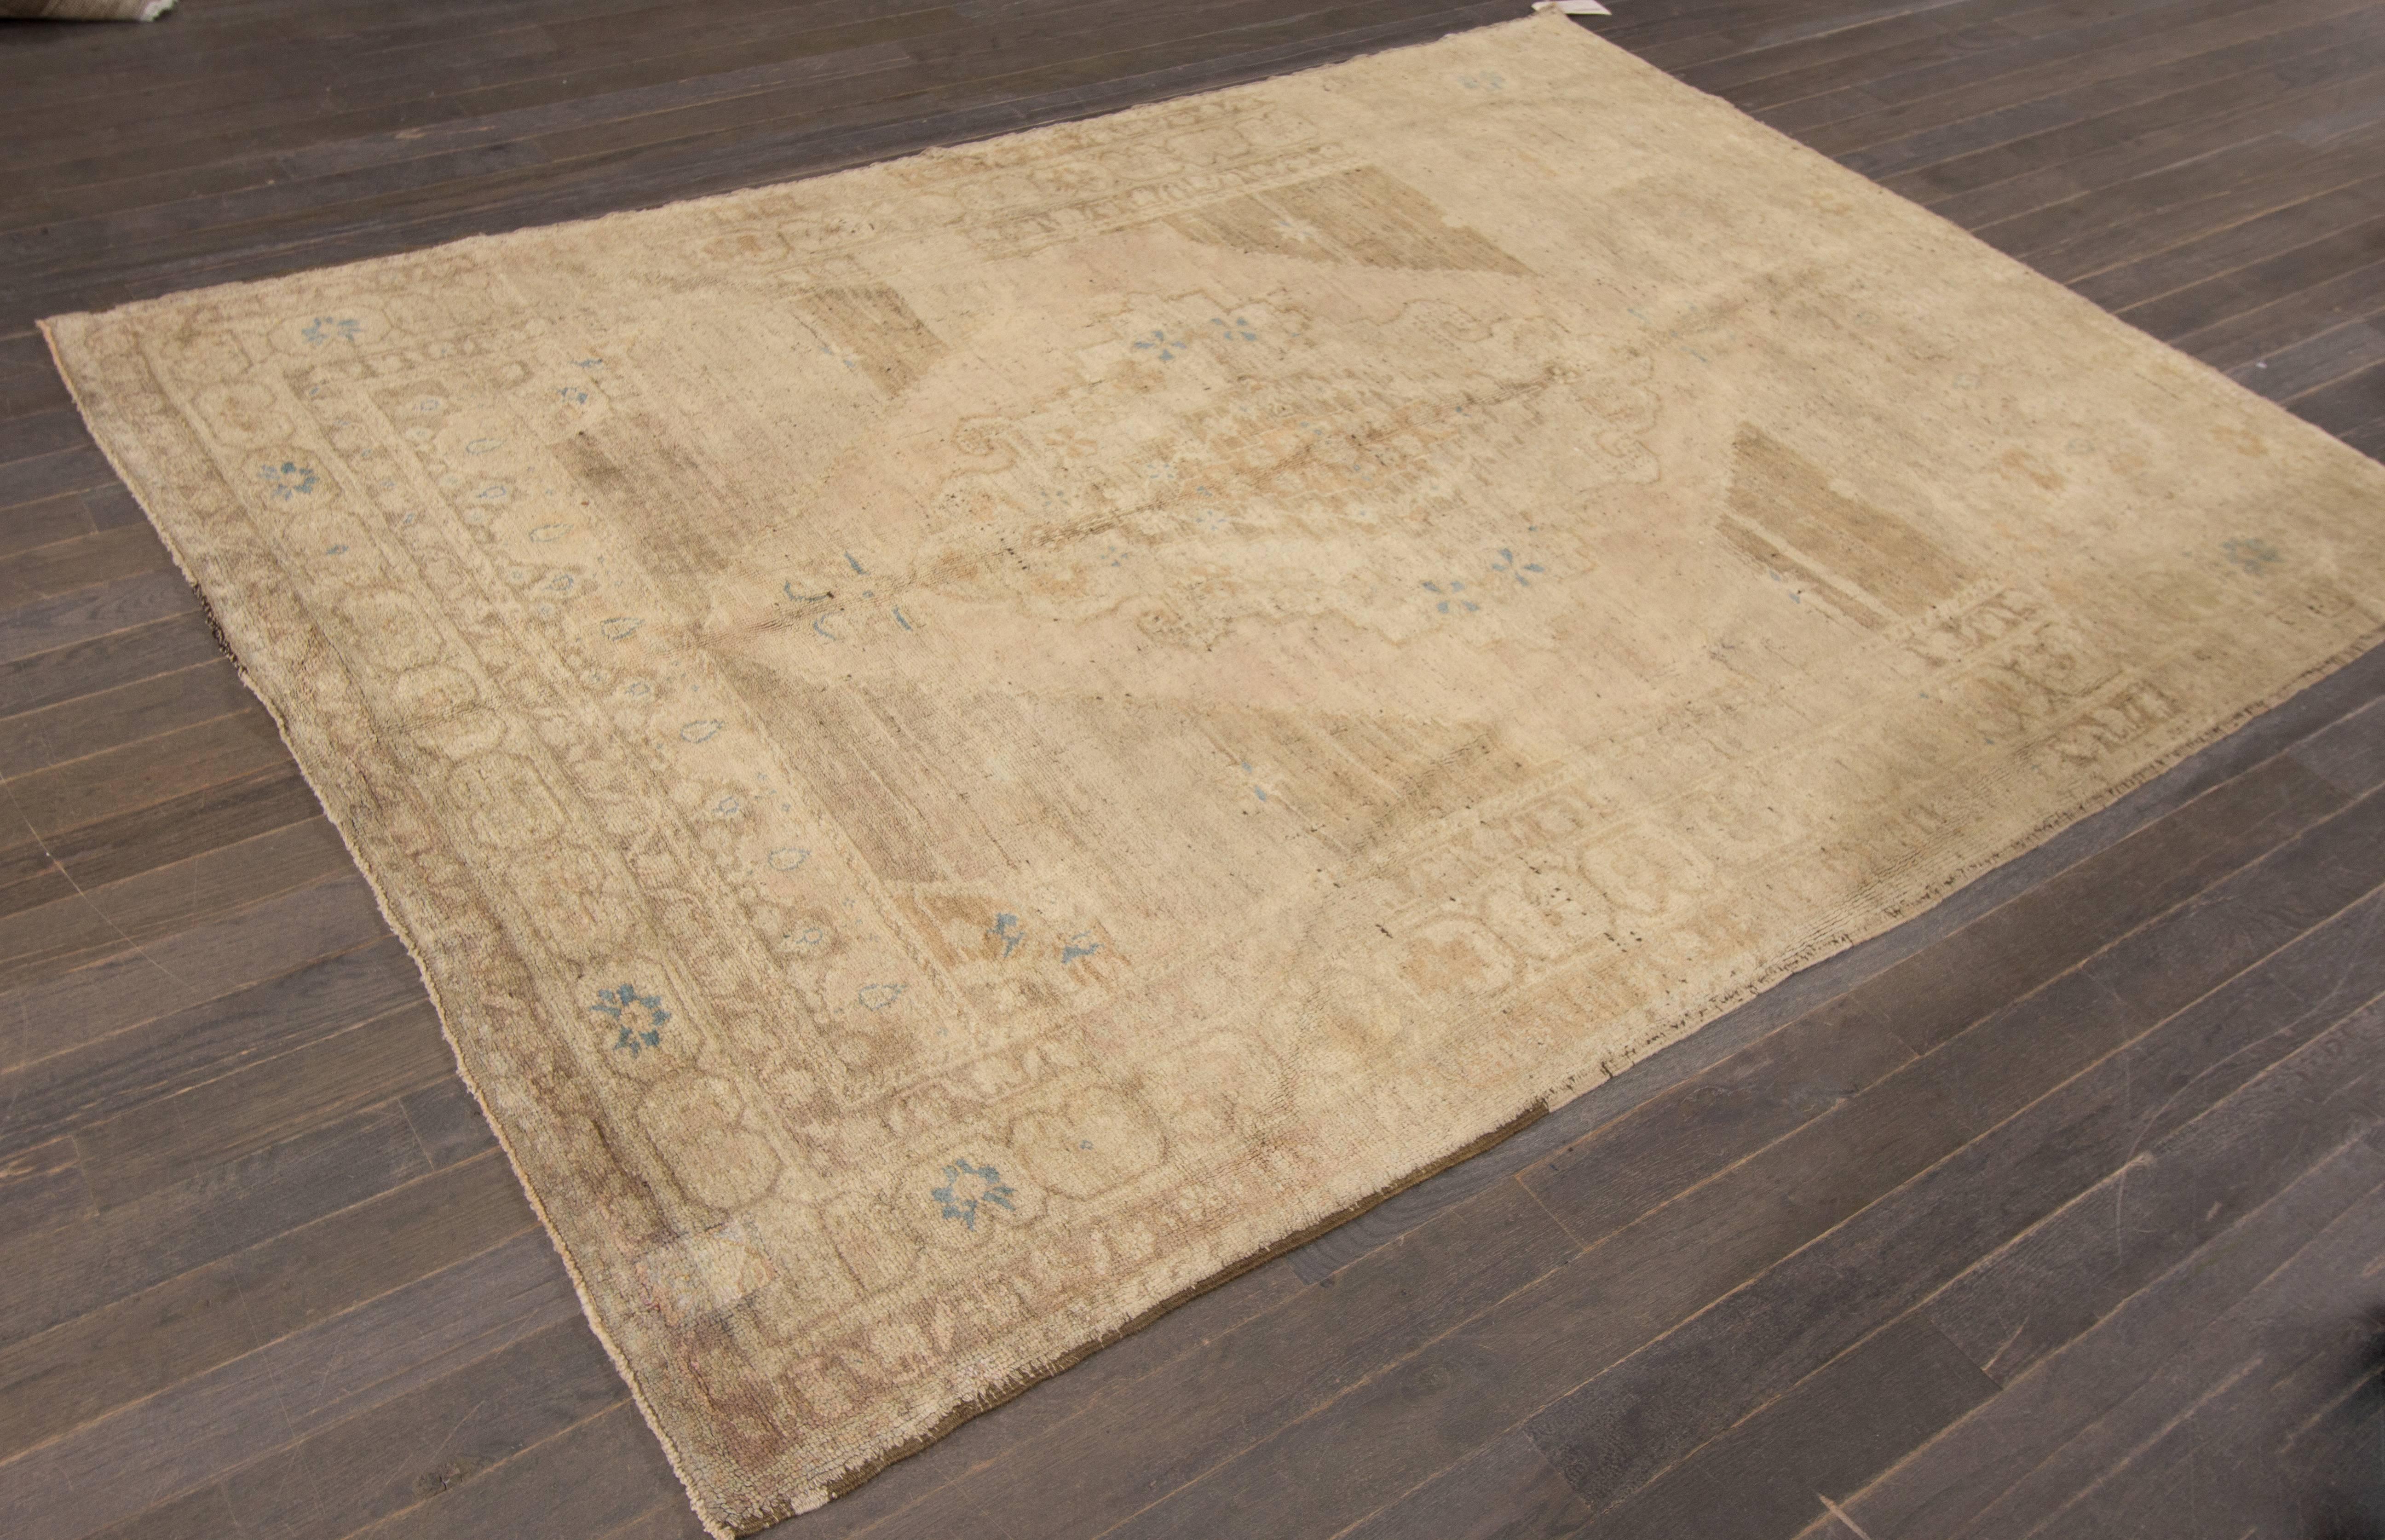 20th century Turkish Khotan-style carpet. Features a beige and tan field surrounding a traditional, central medallion design with blue accents. Measures approximately 5 feet 7 inches by 7 feet 7 inches.